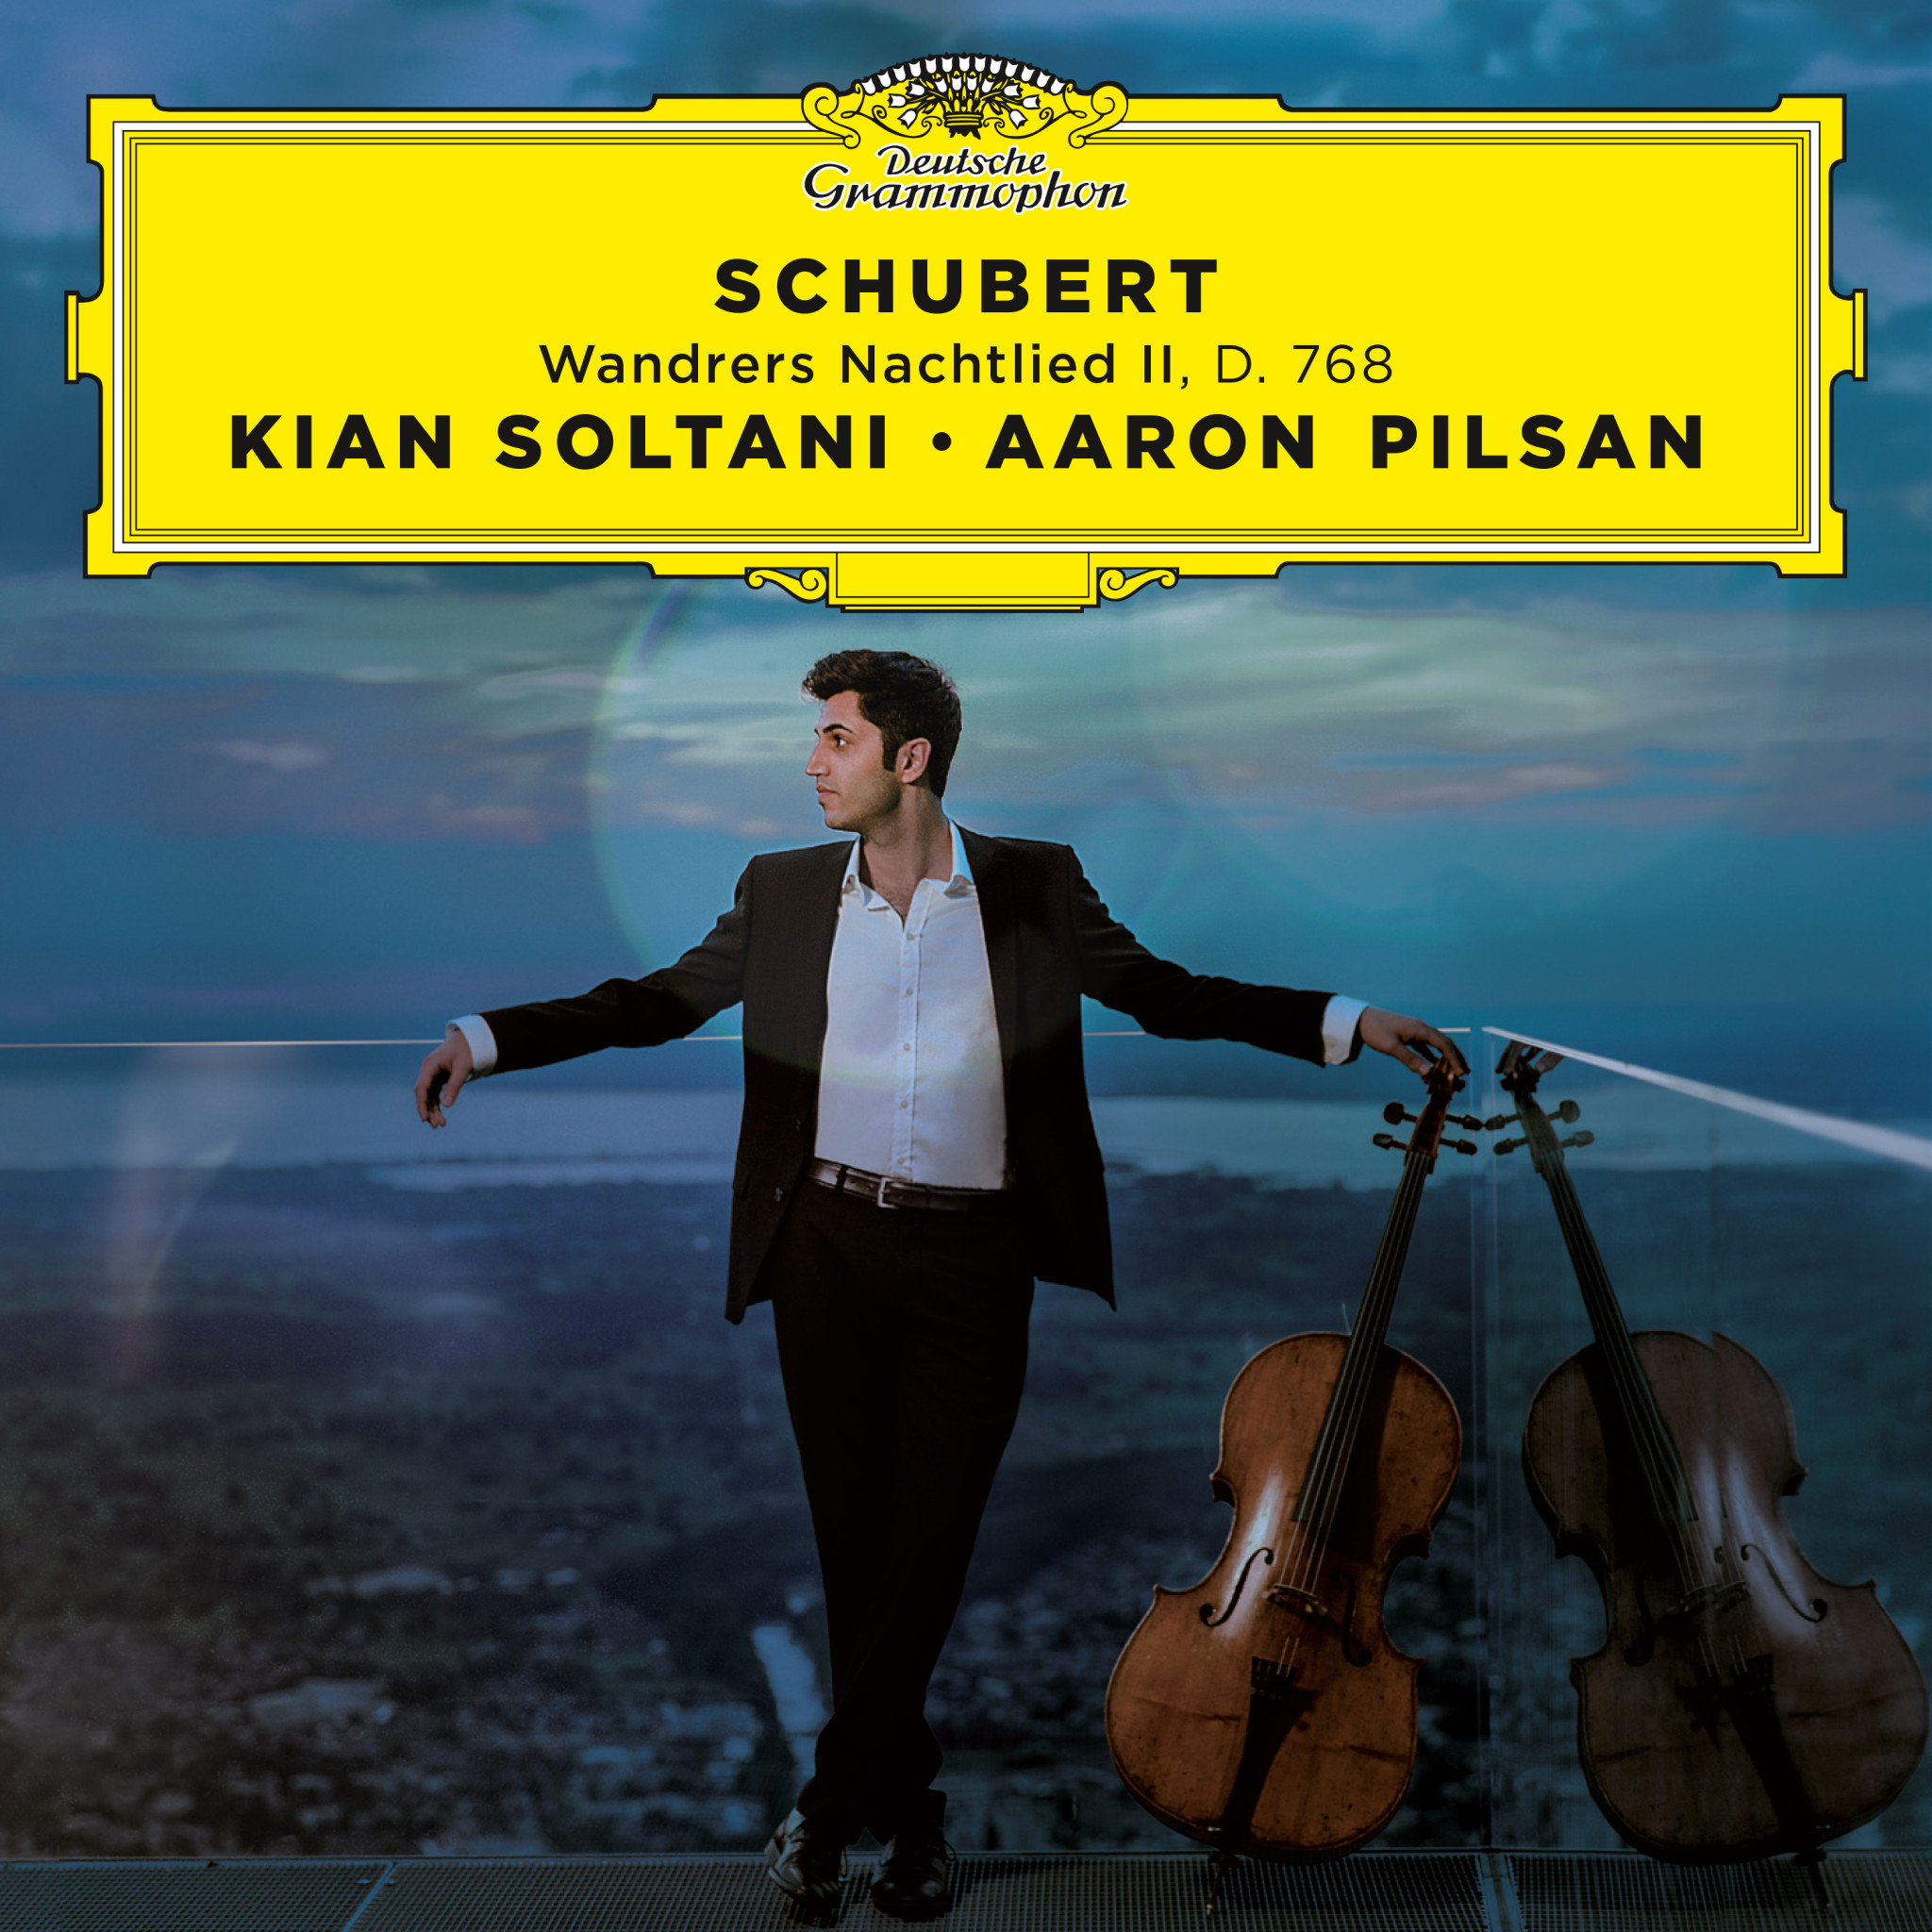 Kian Soltani - Schubert: Wandrers Nachtlied II, D. 768 (Transcr. for Cello and Piano)